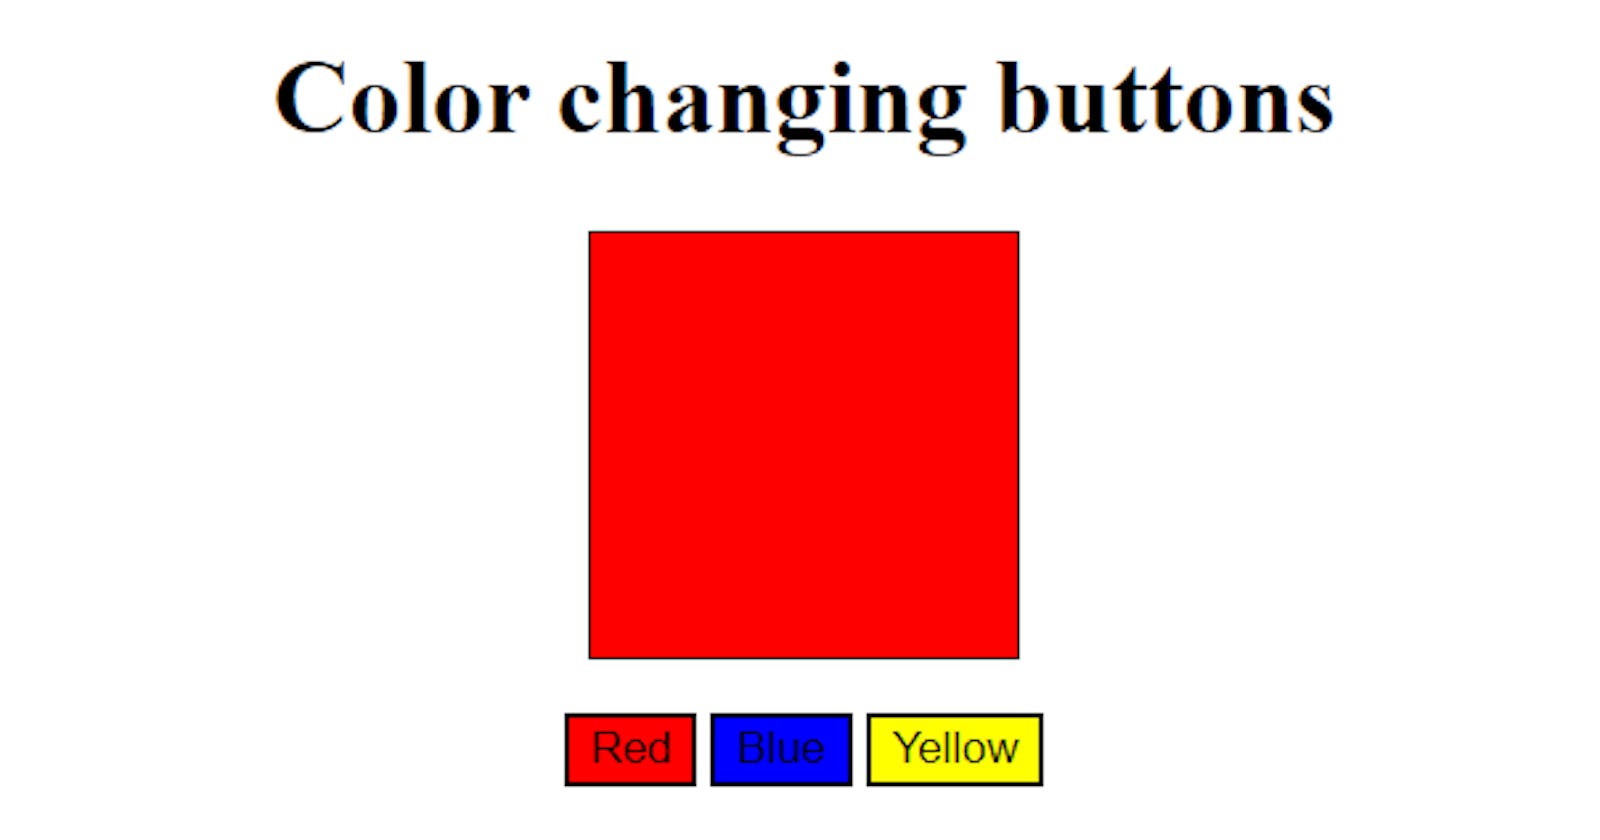 Color changing buttons